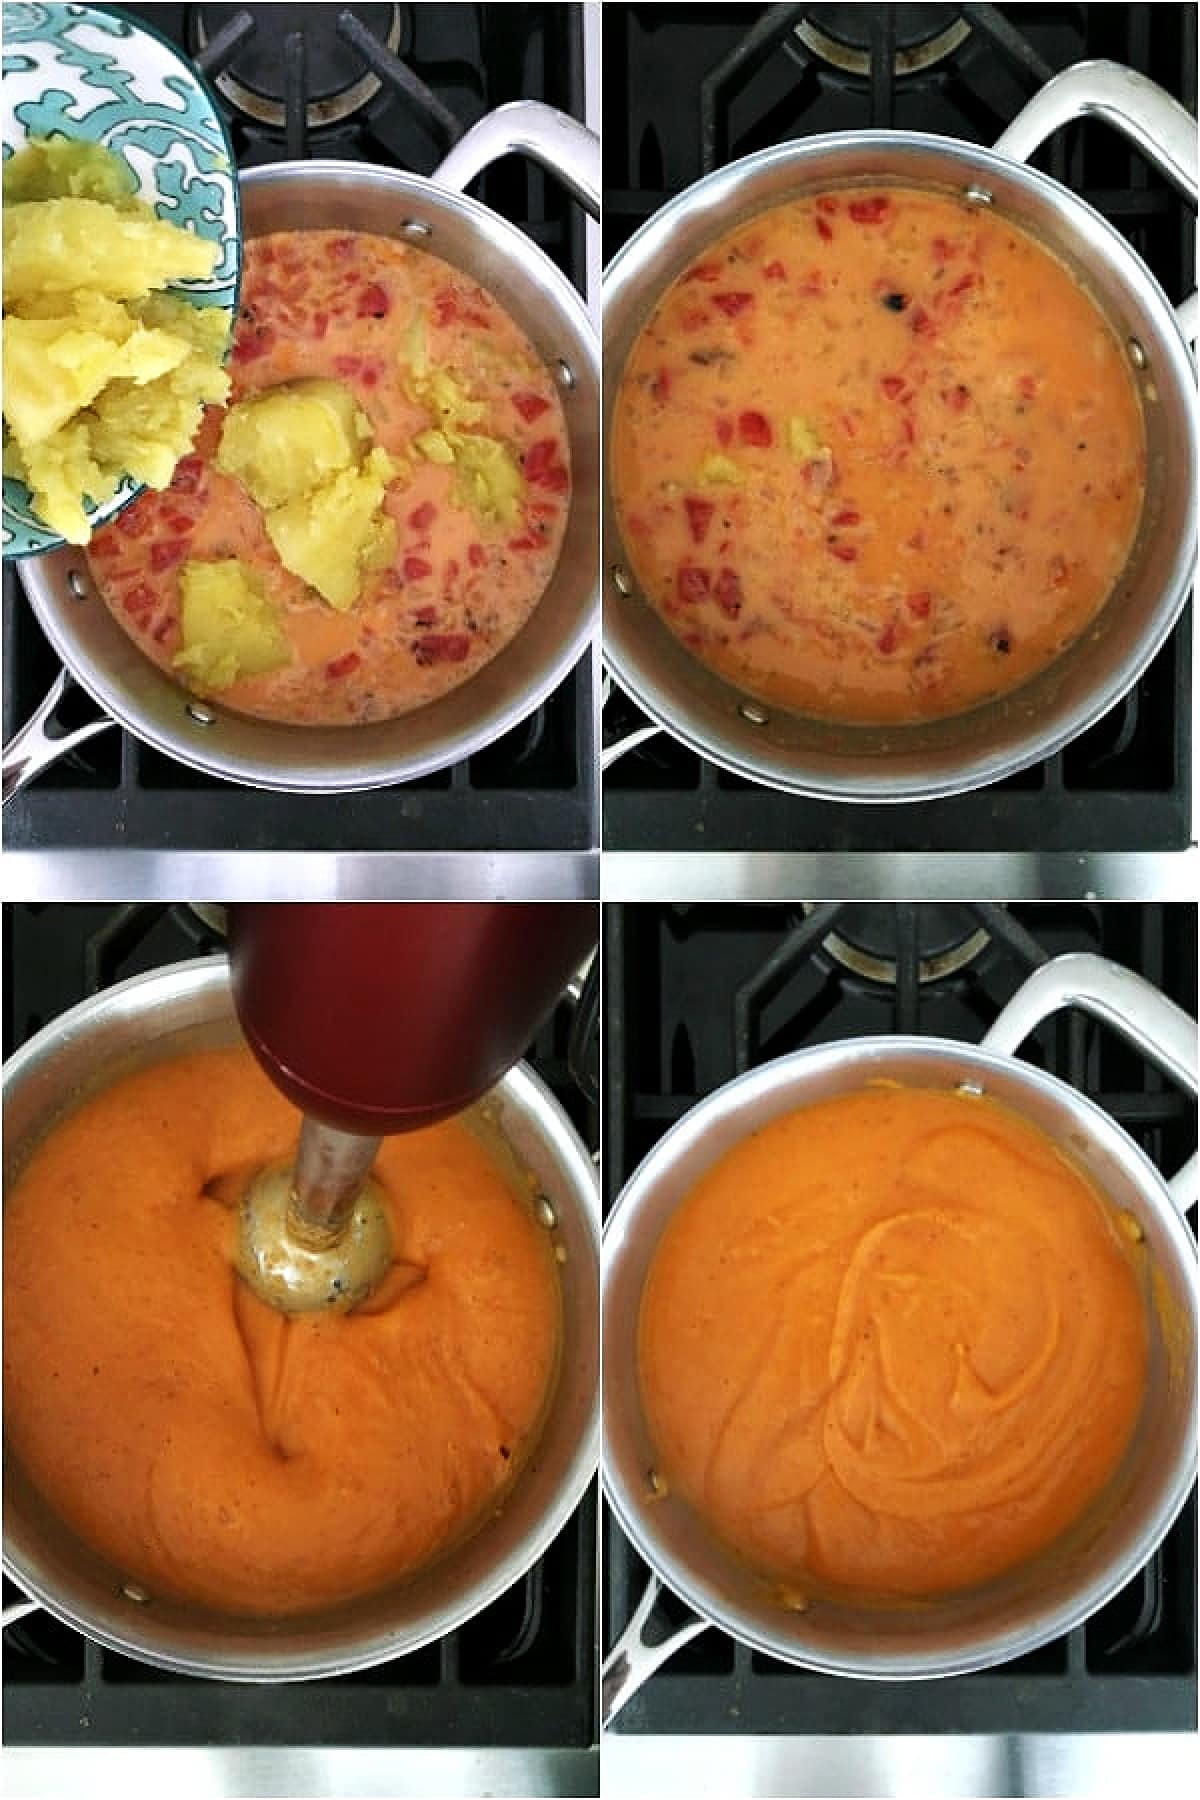 A four image collage shows how to make soup: add curry, coconut milk, diced tomato, stir.: add potato to coconut tomato base, blend with stick blender.